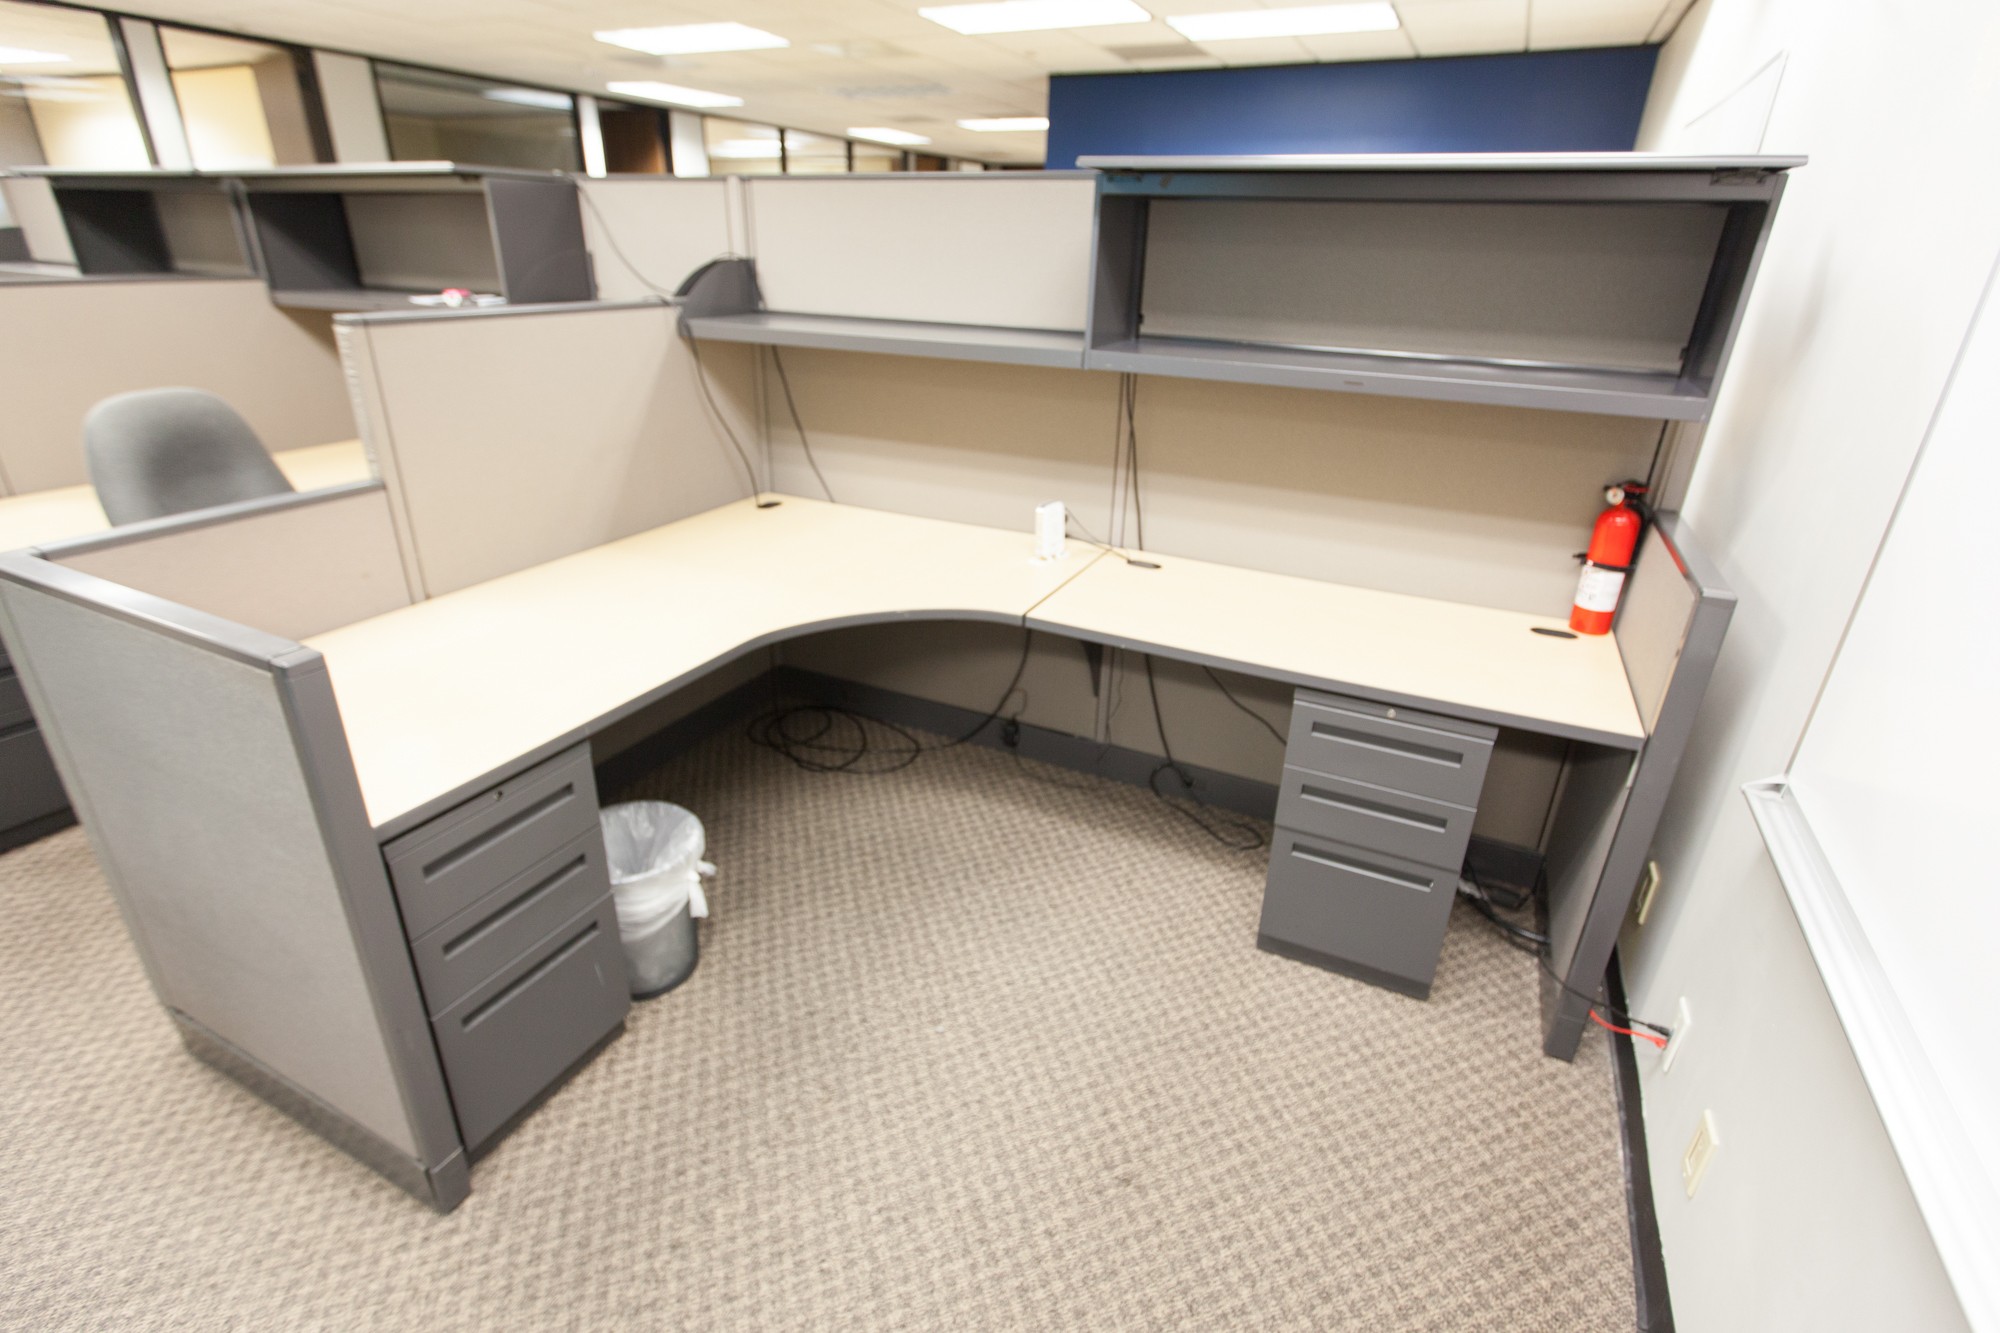 Steelcase Cubicles for Offices-1211